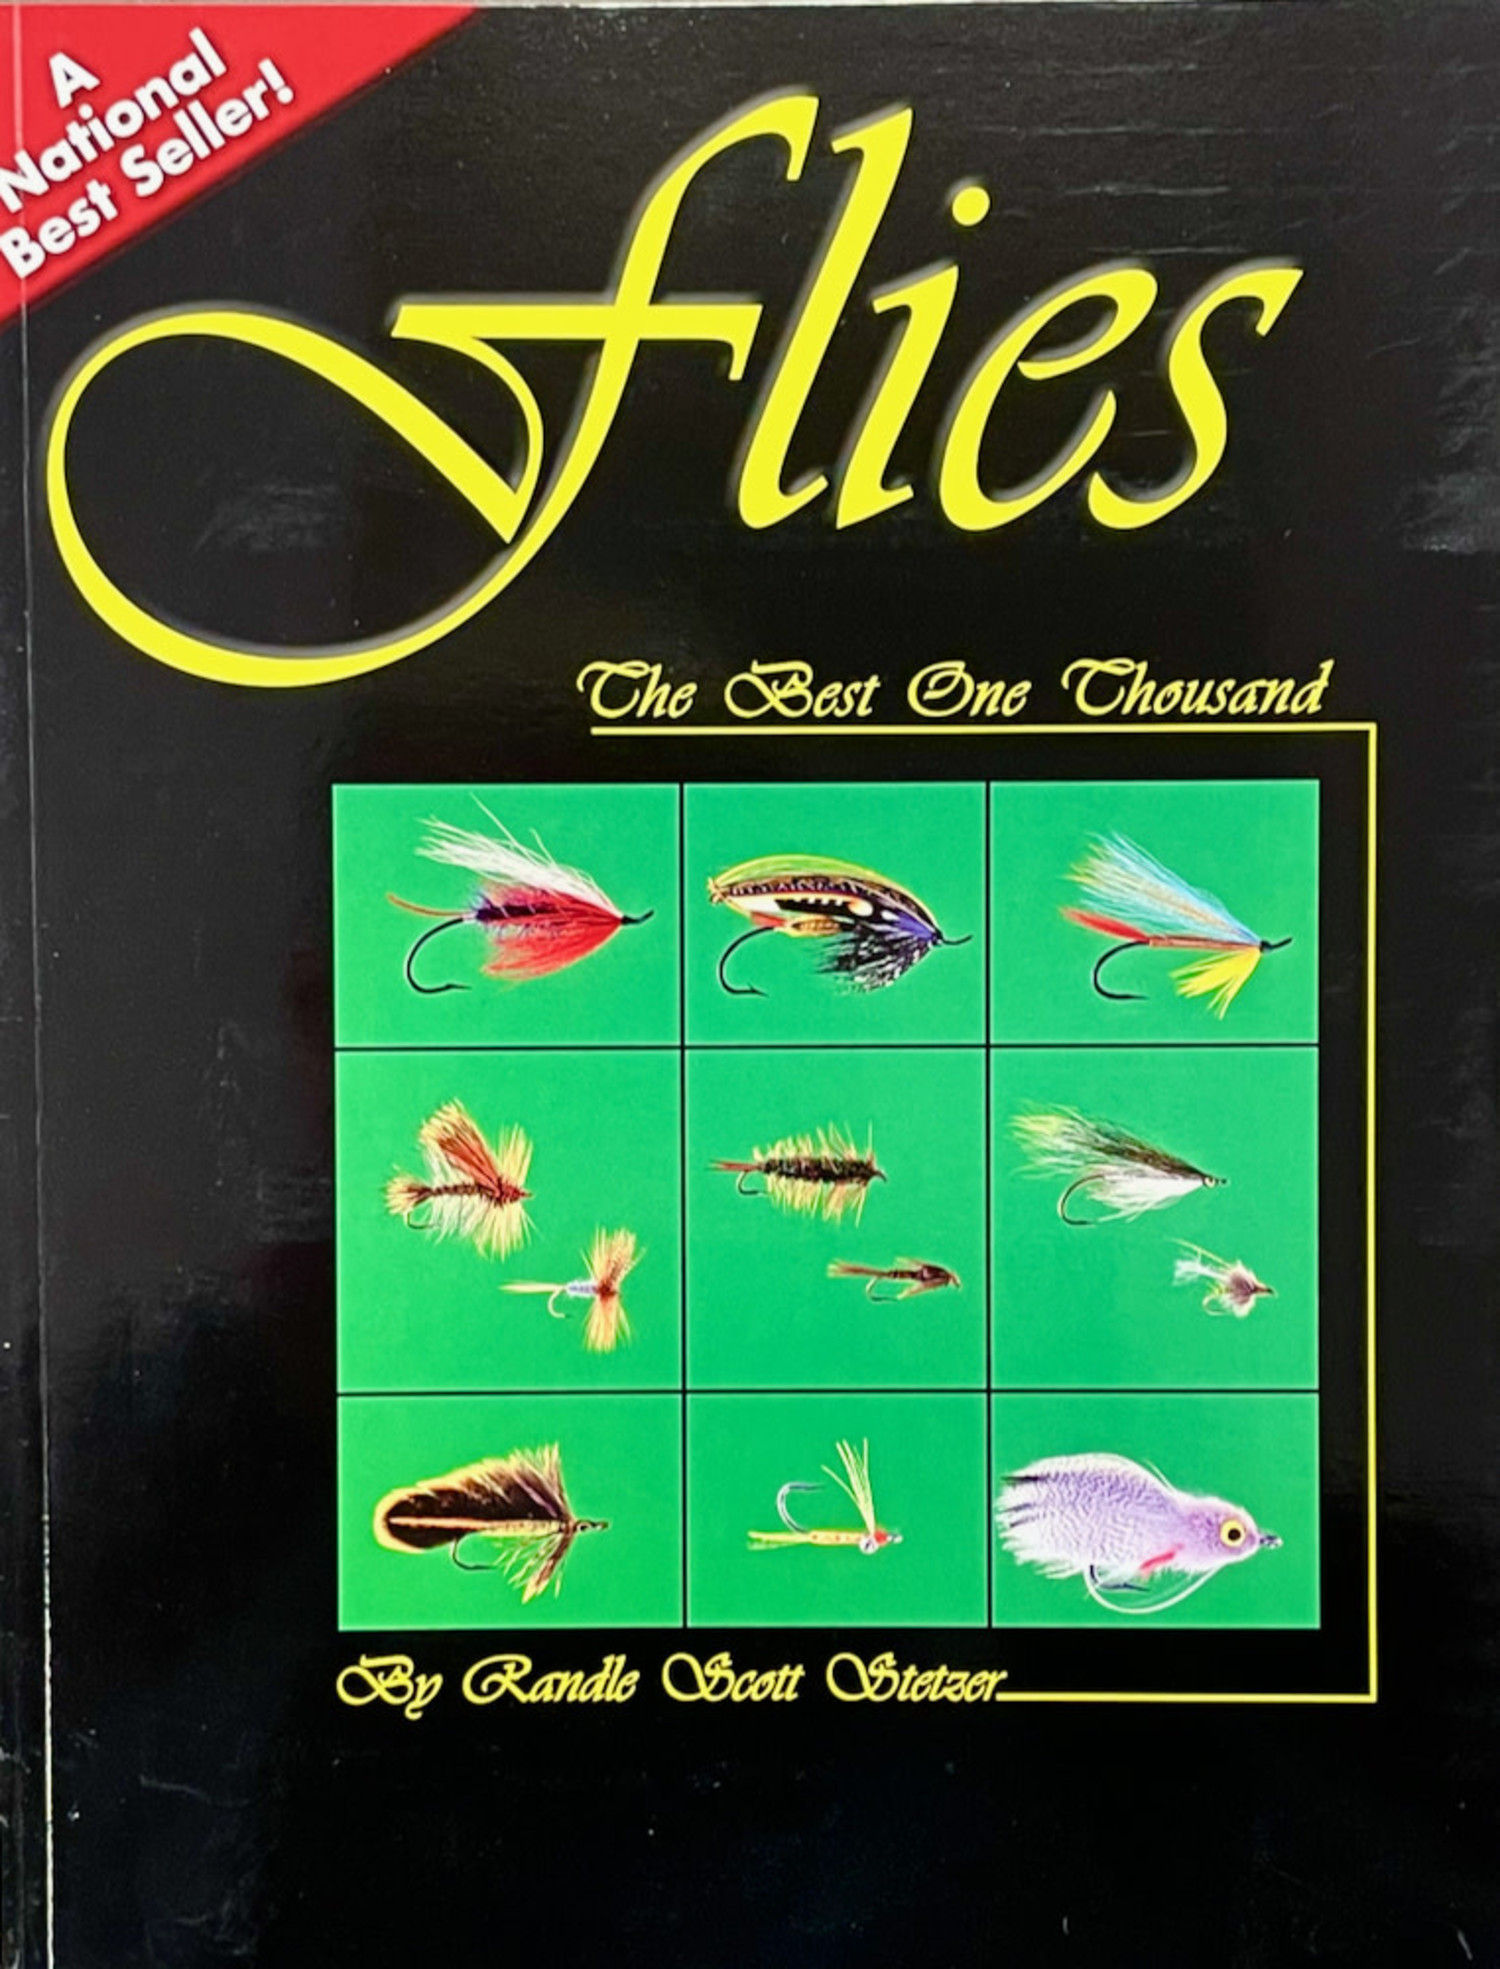 Anglers Books Flies: The Best One Thousand by Randy Stetzer